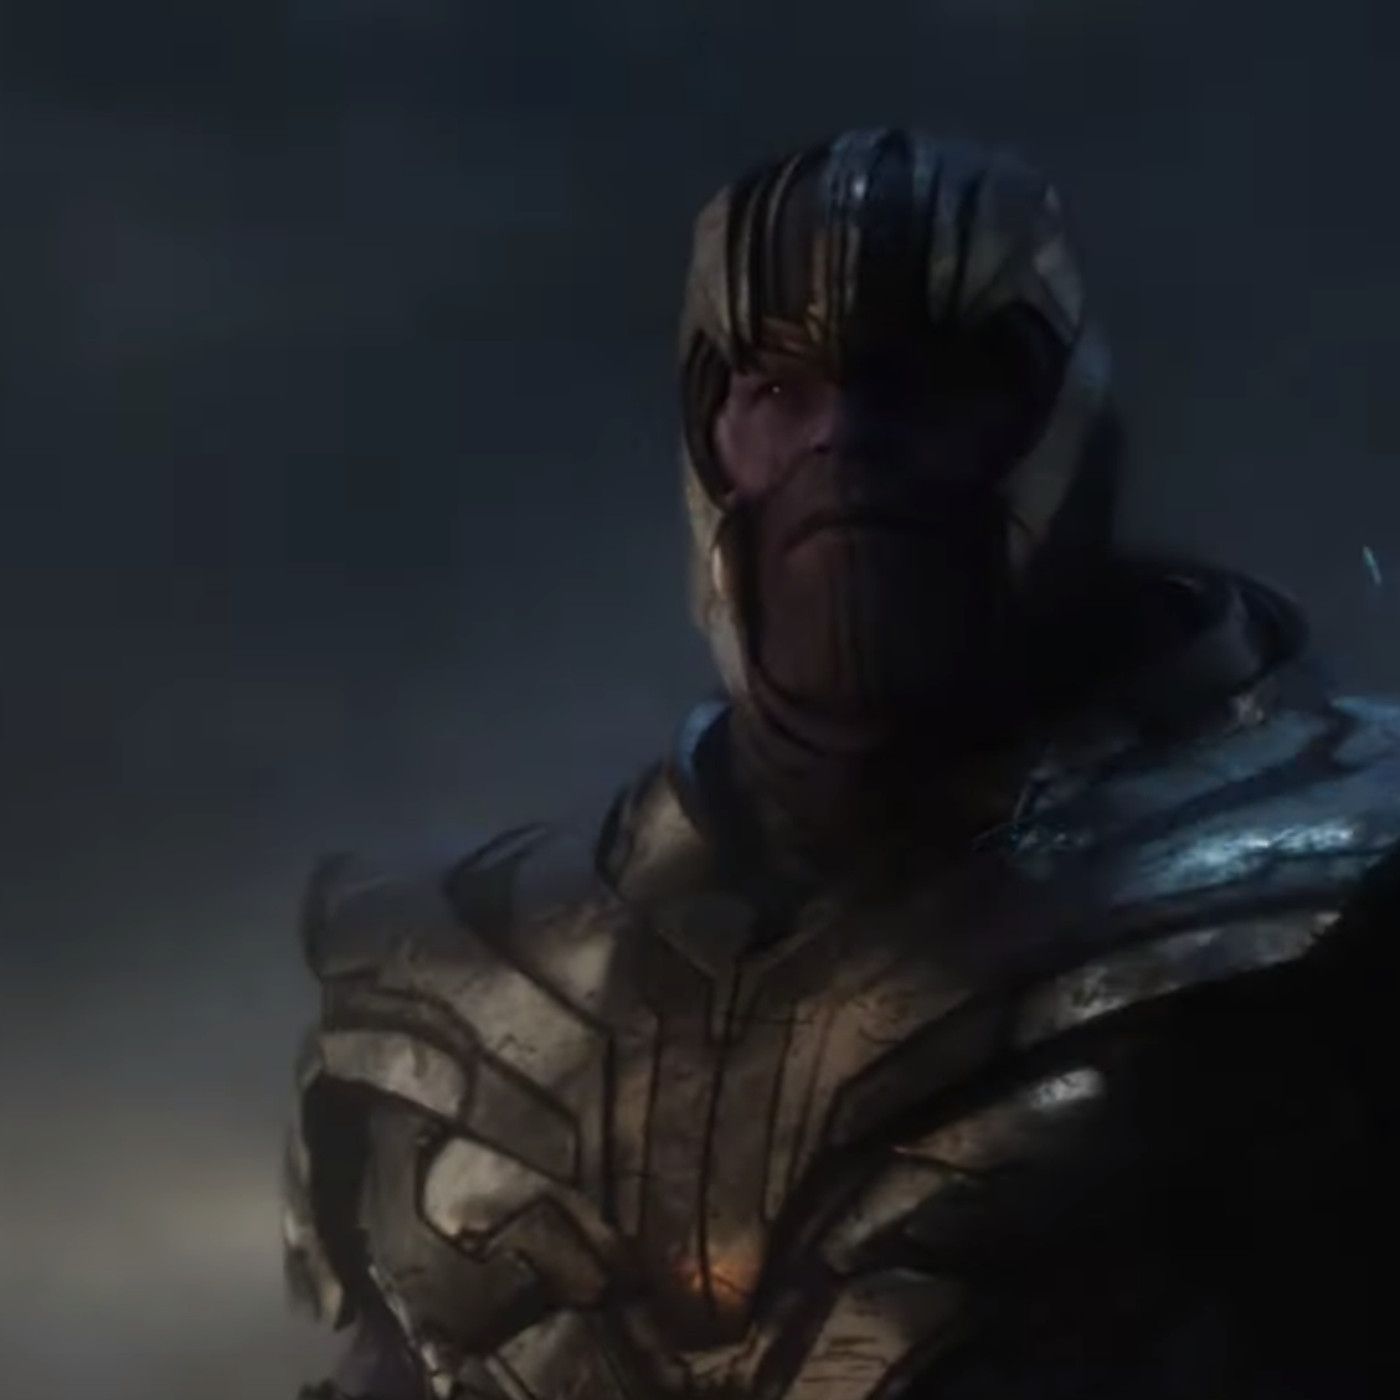 The Avengers assemble to take on Thanos in new Endgame teaser